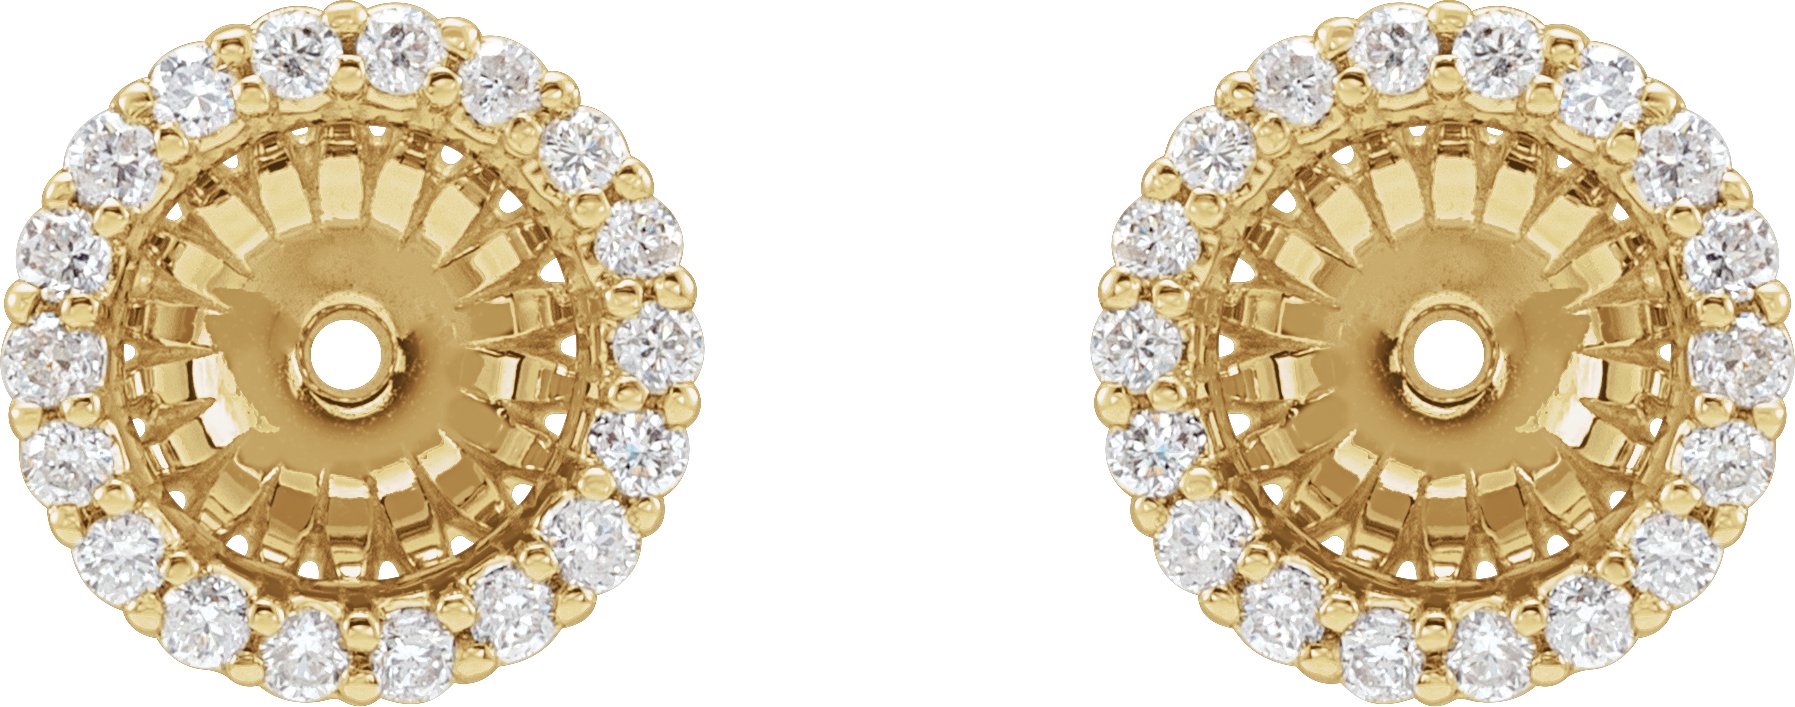 14K Yellow 1/5 CTW Diamond Earring Jackets with 6.1 mm ID